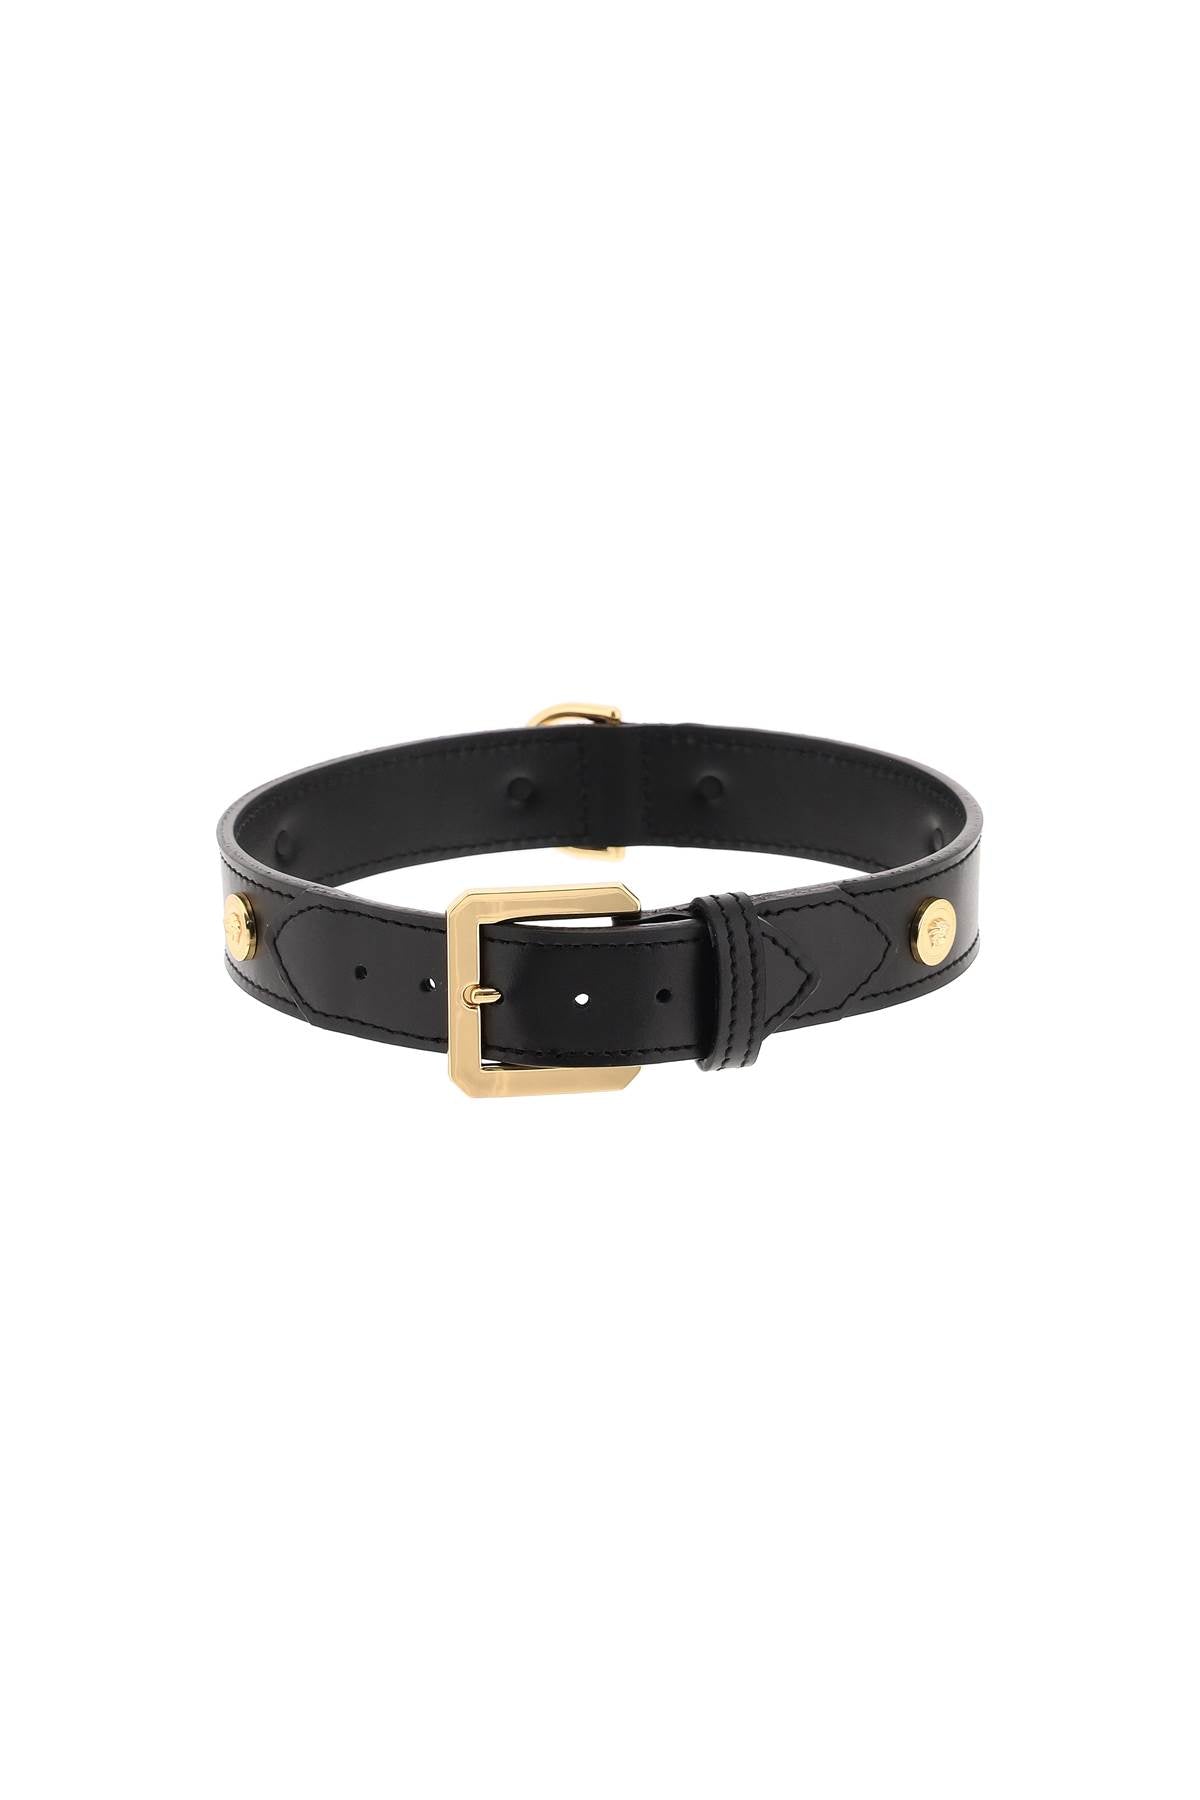 Versace leather collar with medusa studs - large-0